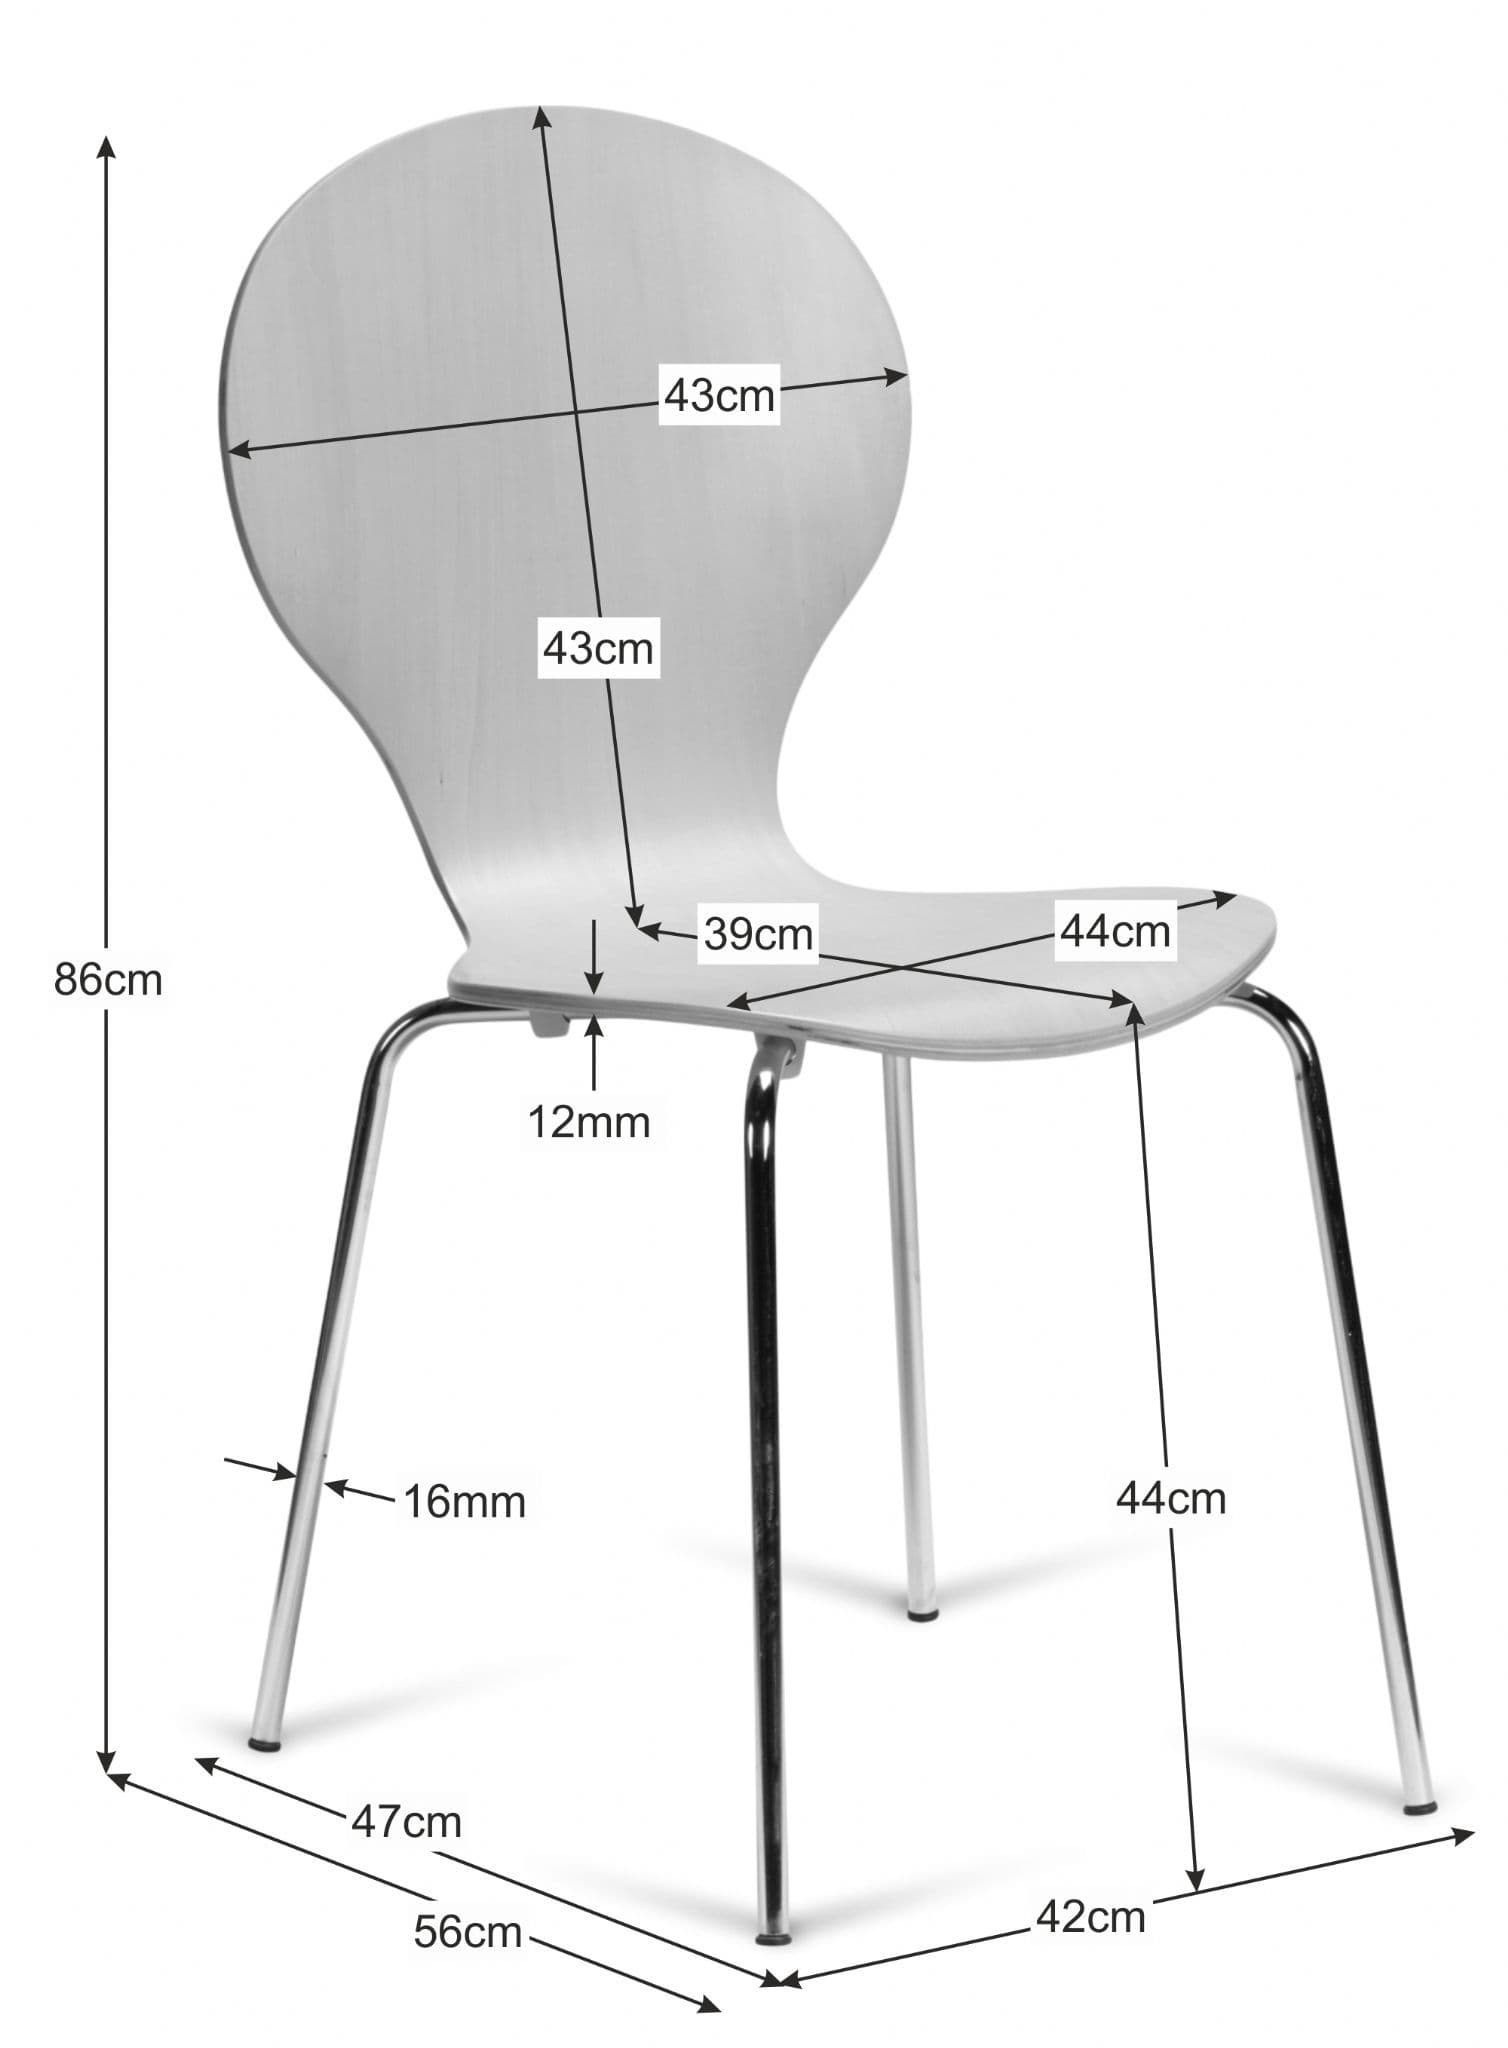 Kimberley Black & Chrome Dining Chairs Dimensions